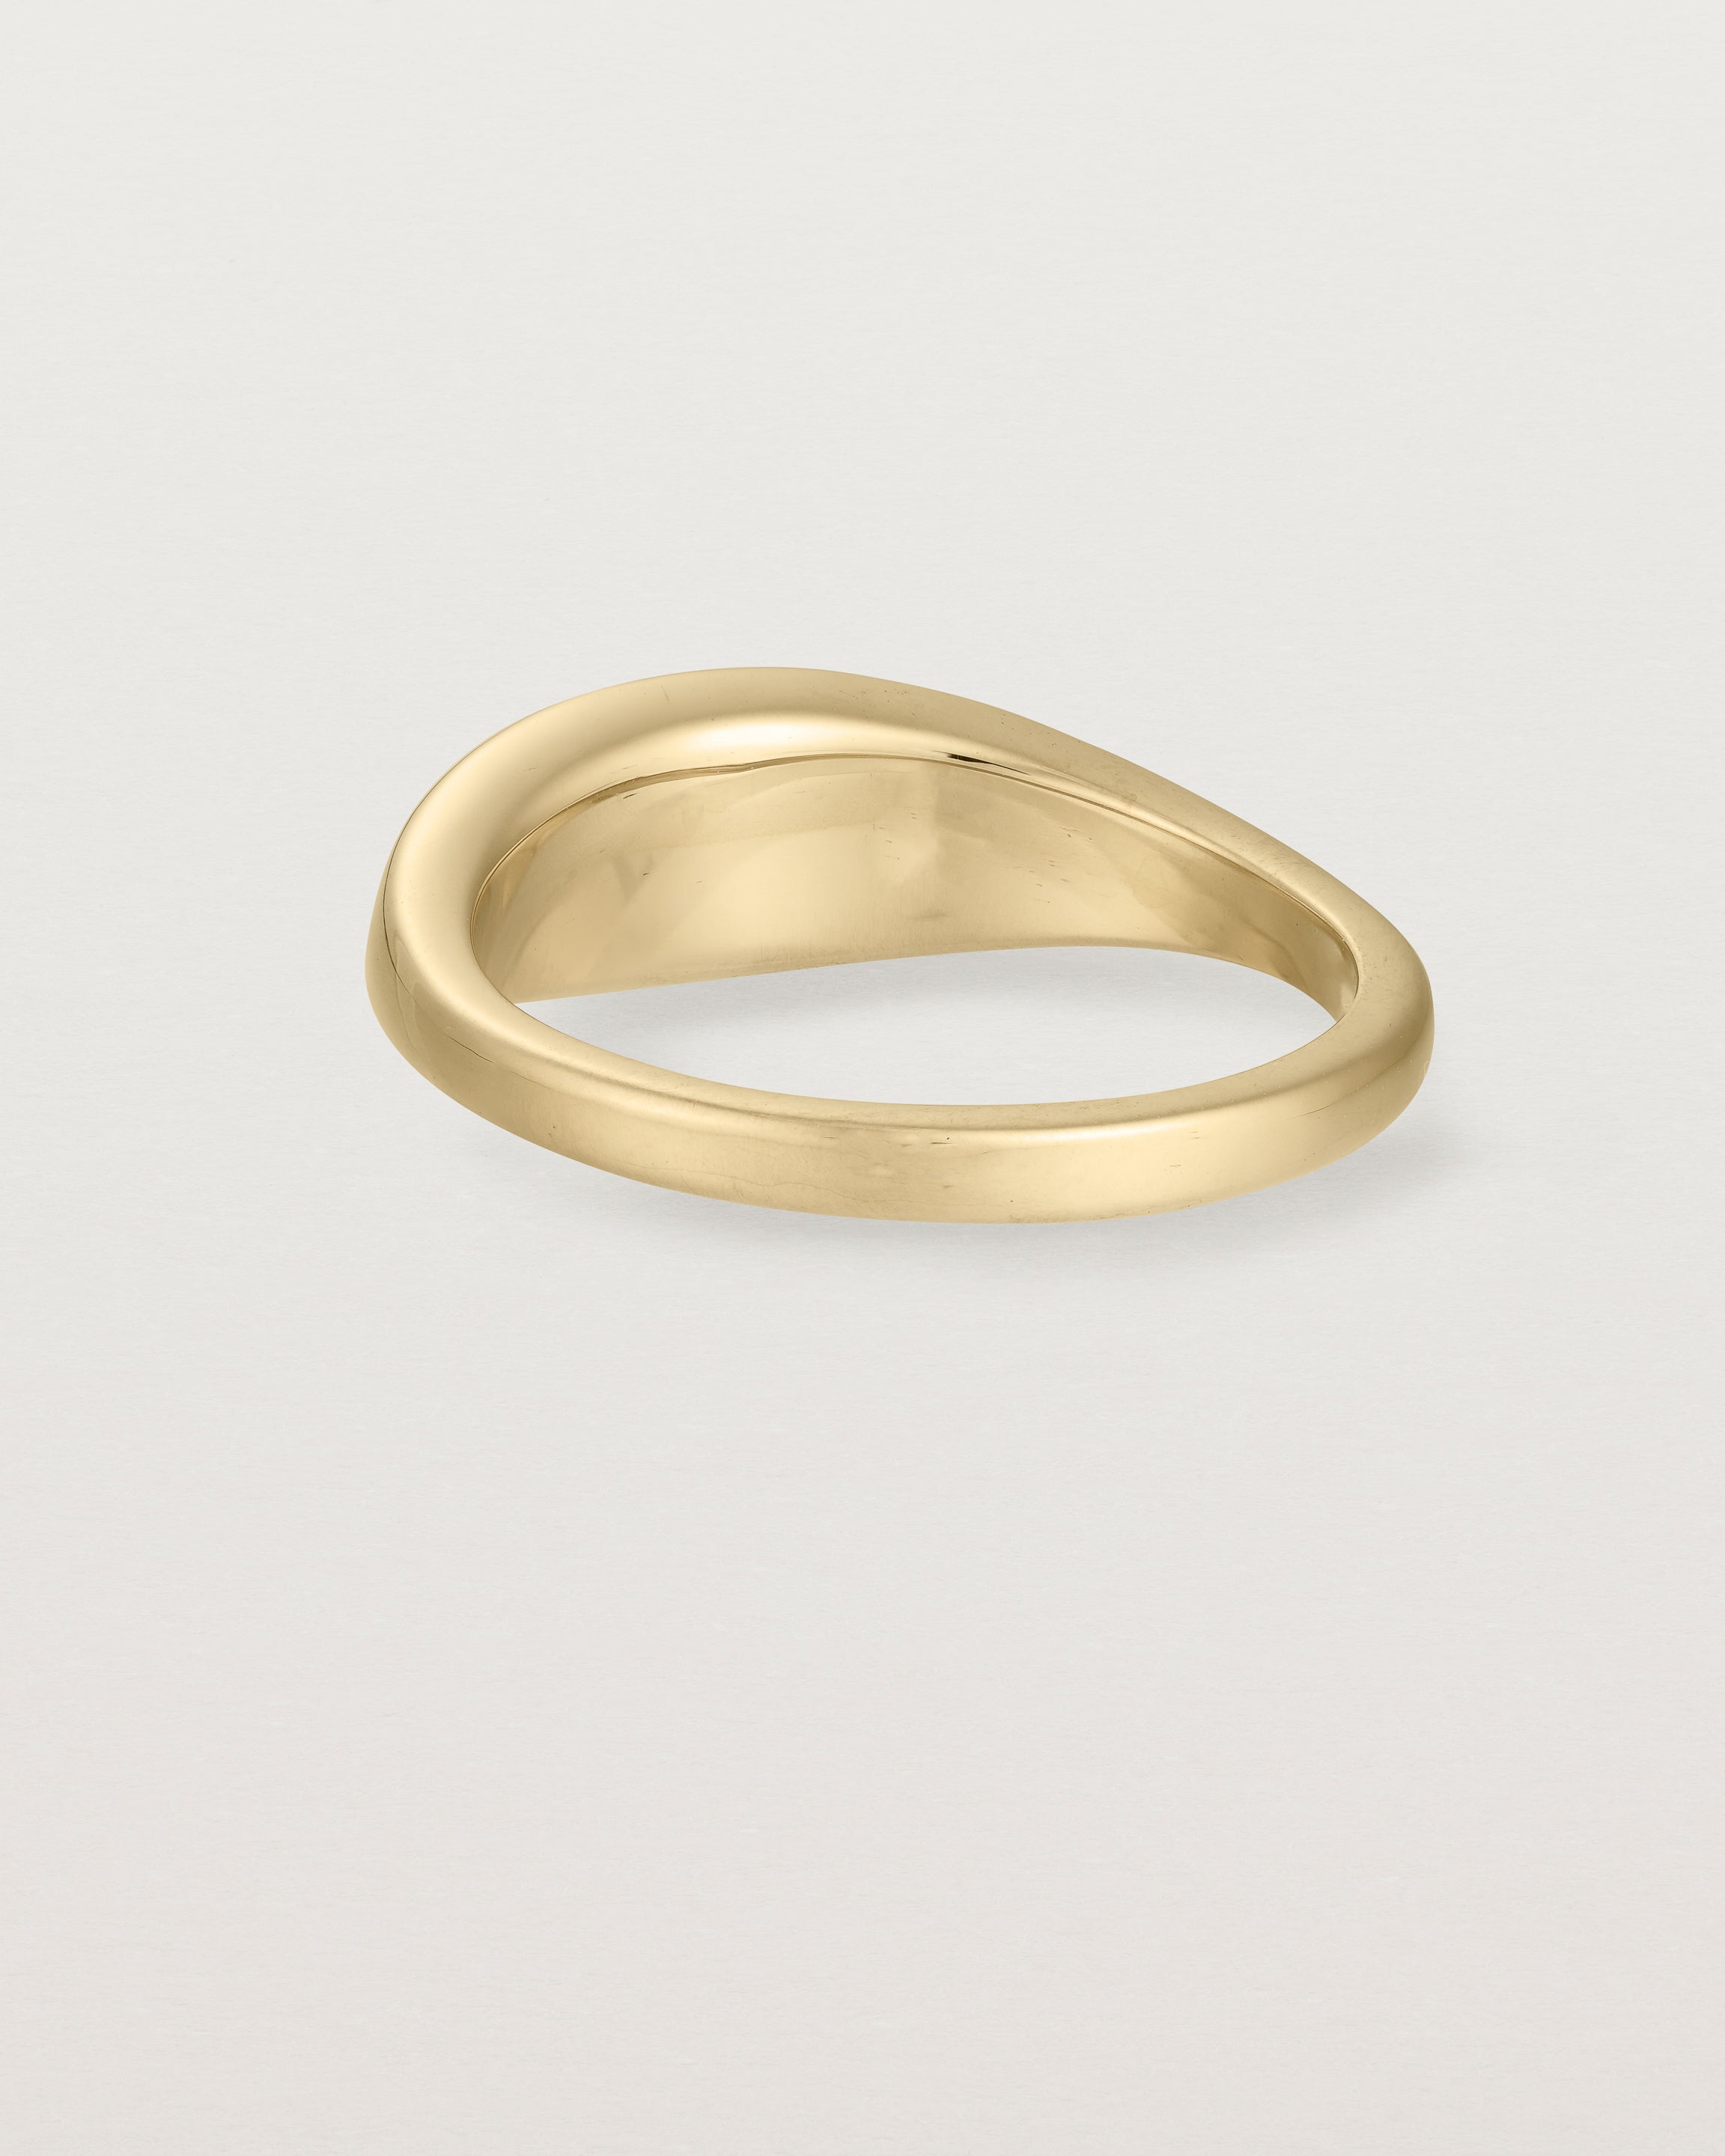 Back view of the Seule Ring | Yellow Gold.